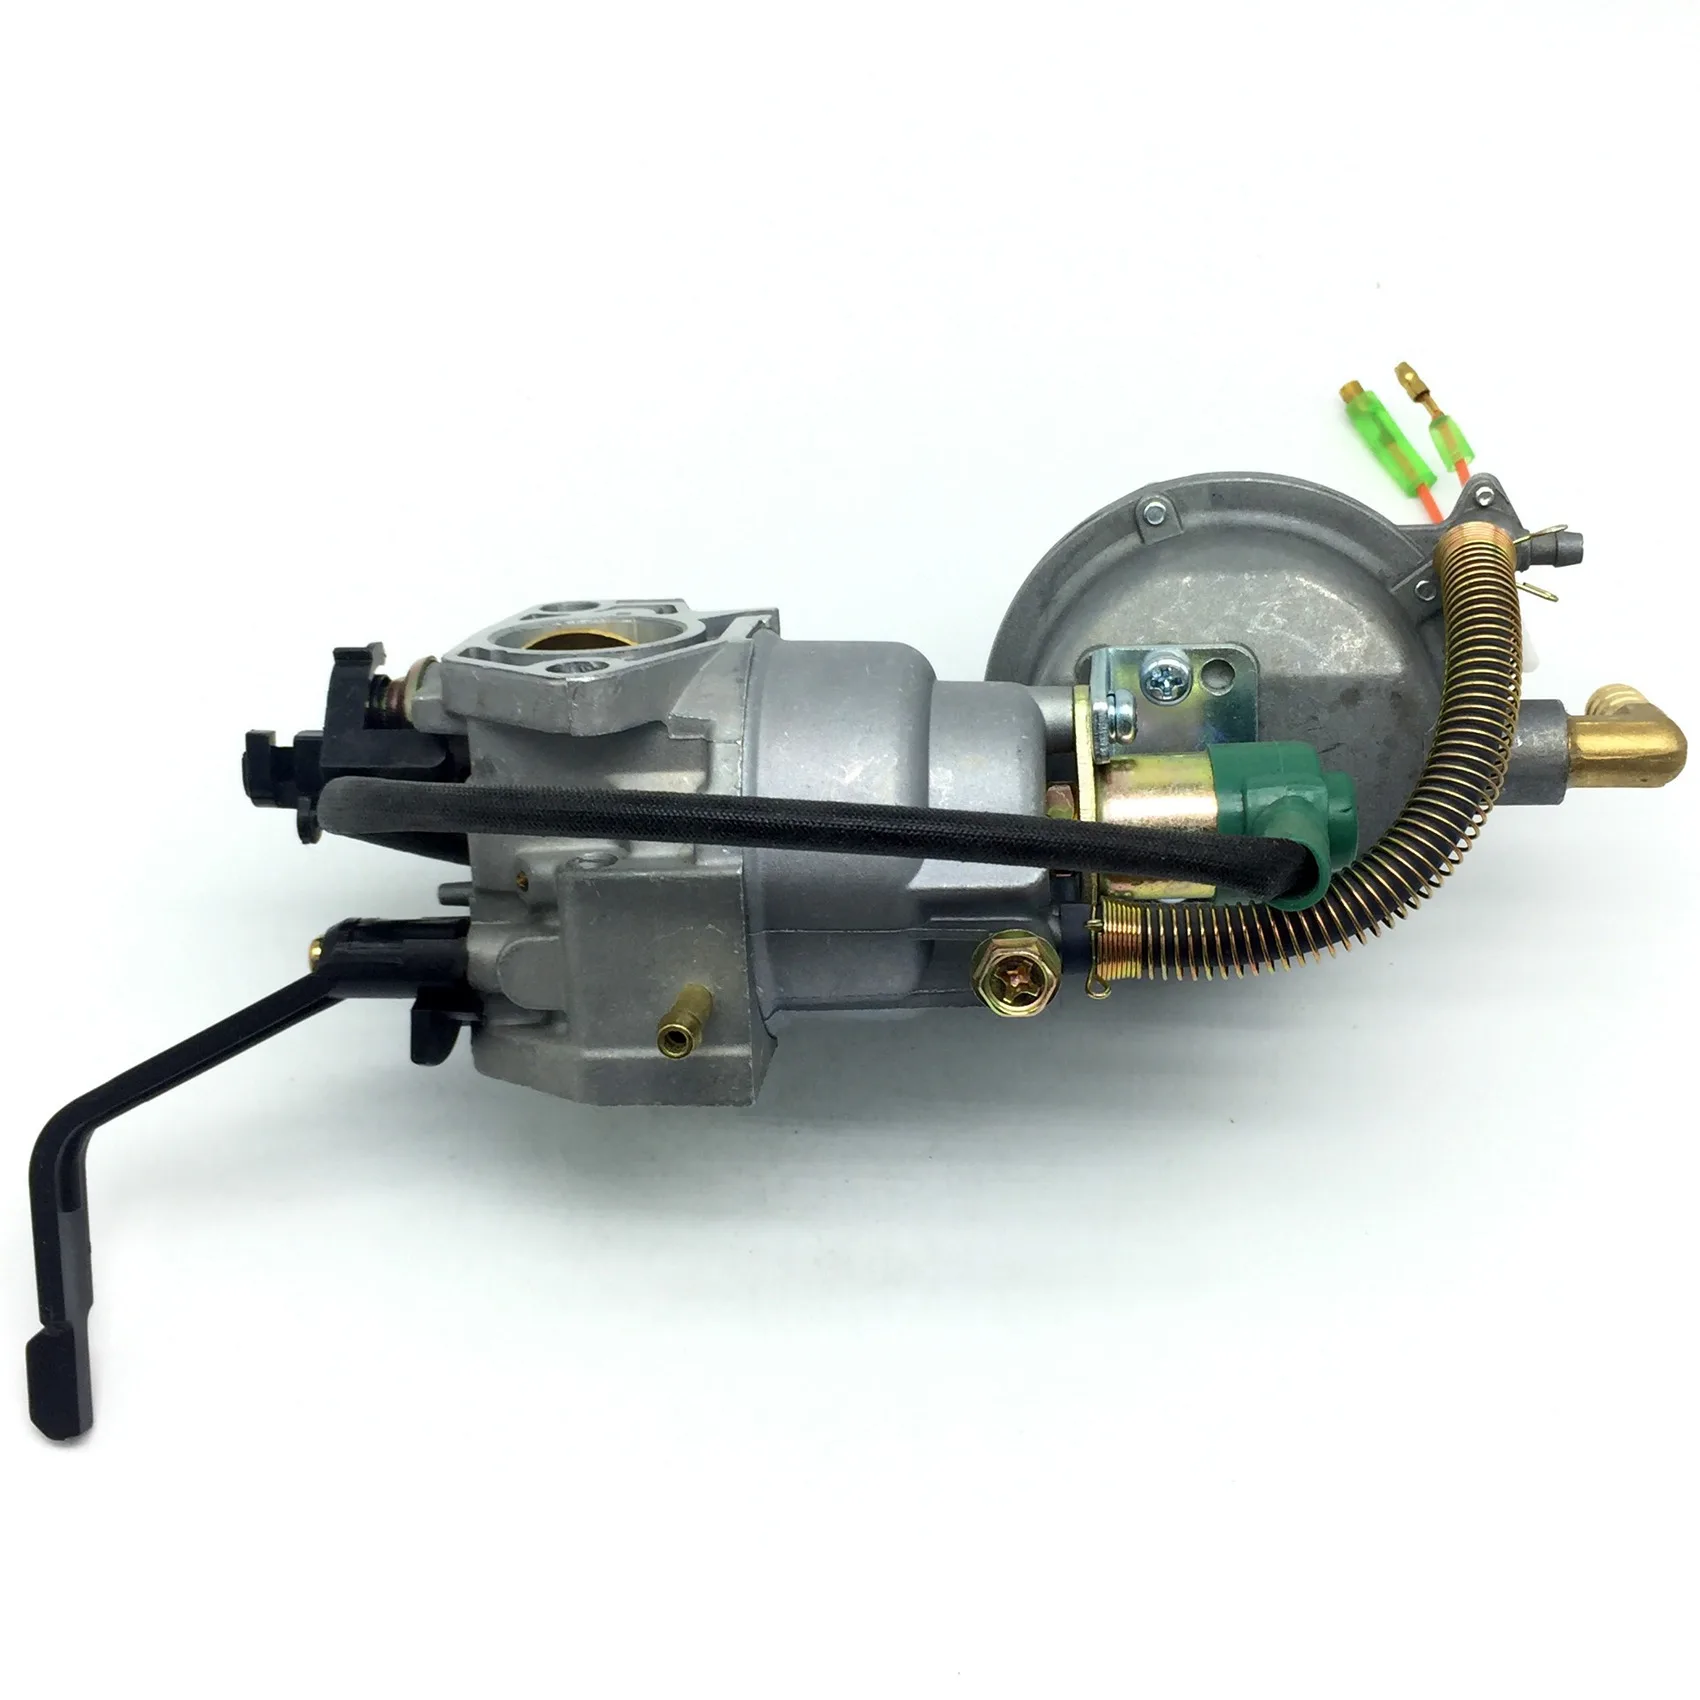 Dual Fuel Generator Carburetor for GX390 GX340 Gas Small Engines 188F 5KW-8KW NG Petrol Motorcycle images - 6